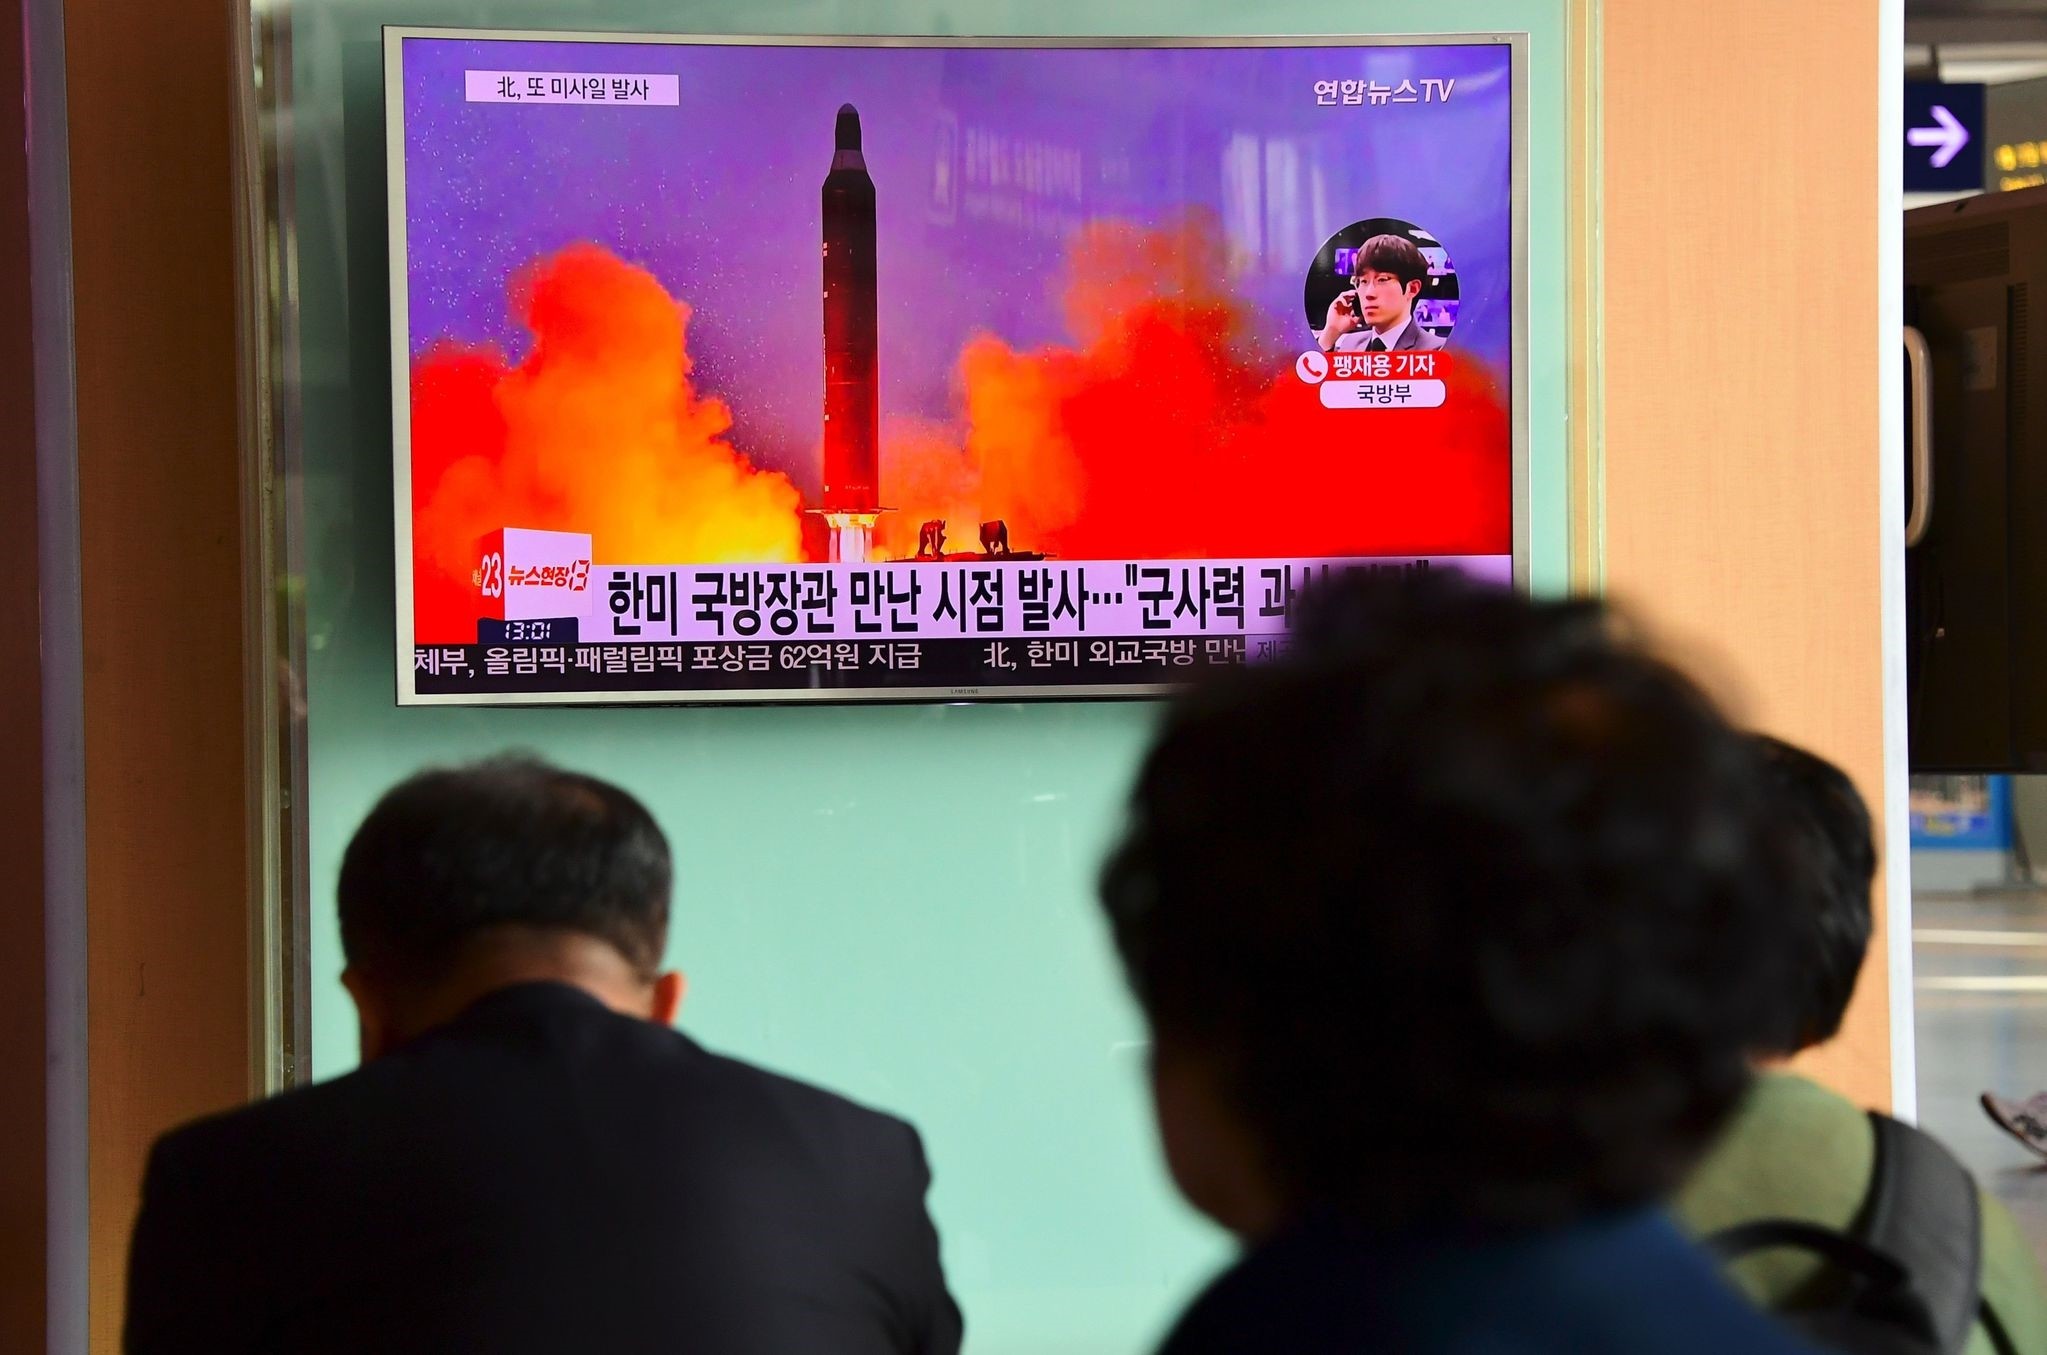 People watch a television news report showing file footage of North Korea's missile launch at a railway station in Seoul on October 20, 2016. (AFP Photo)